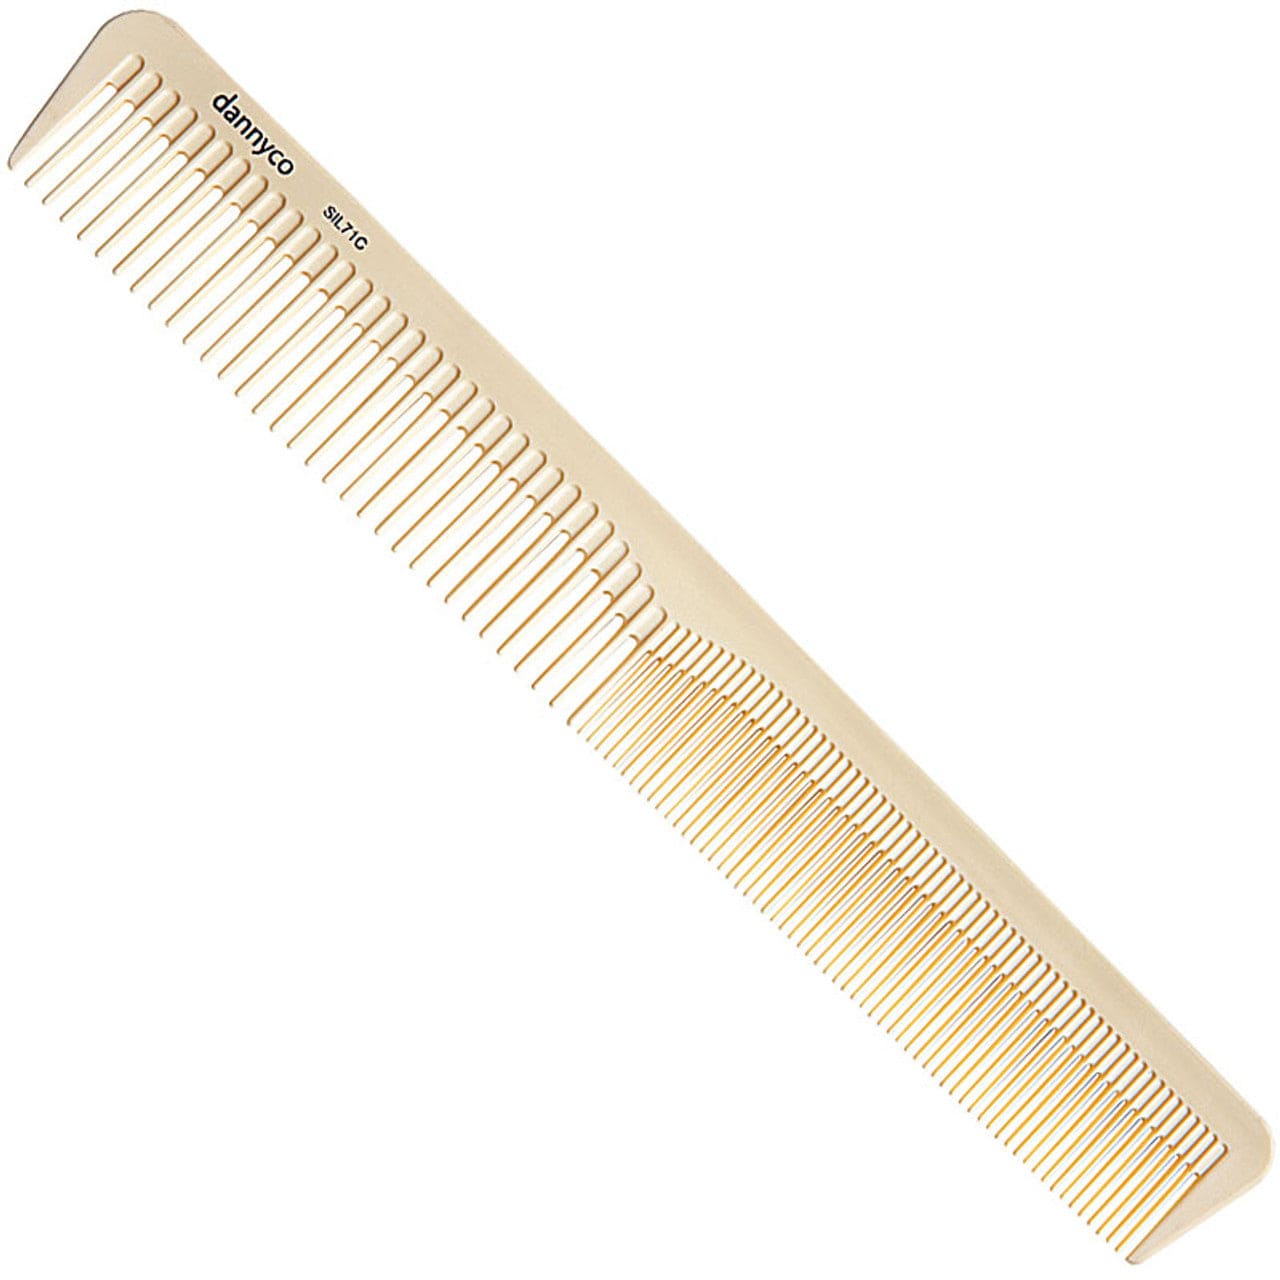 DANNYCO_Silicone Styling Comb - SIL52C_Cosmetic World